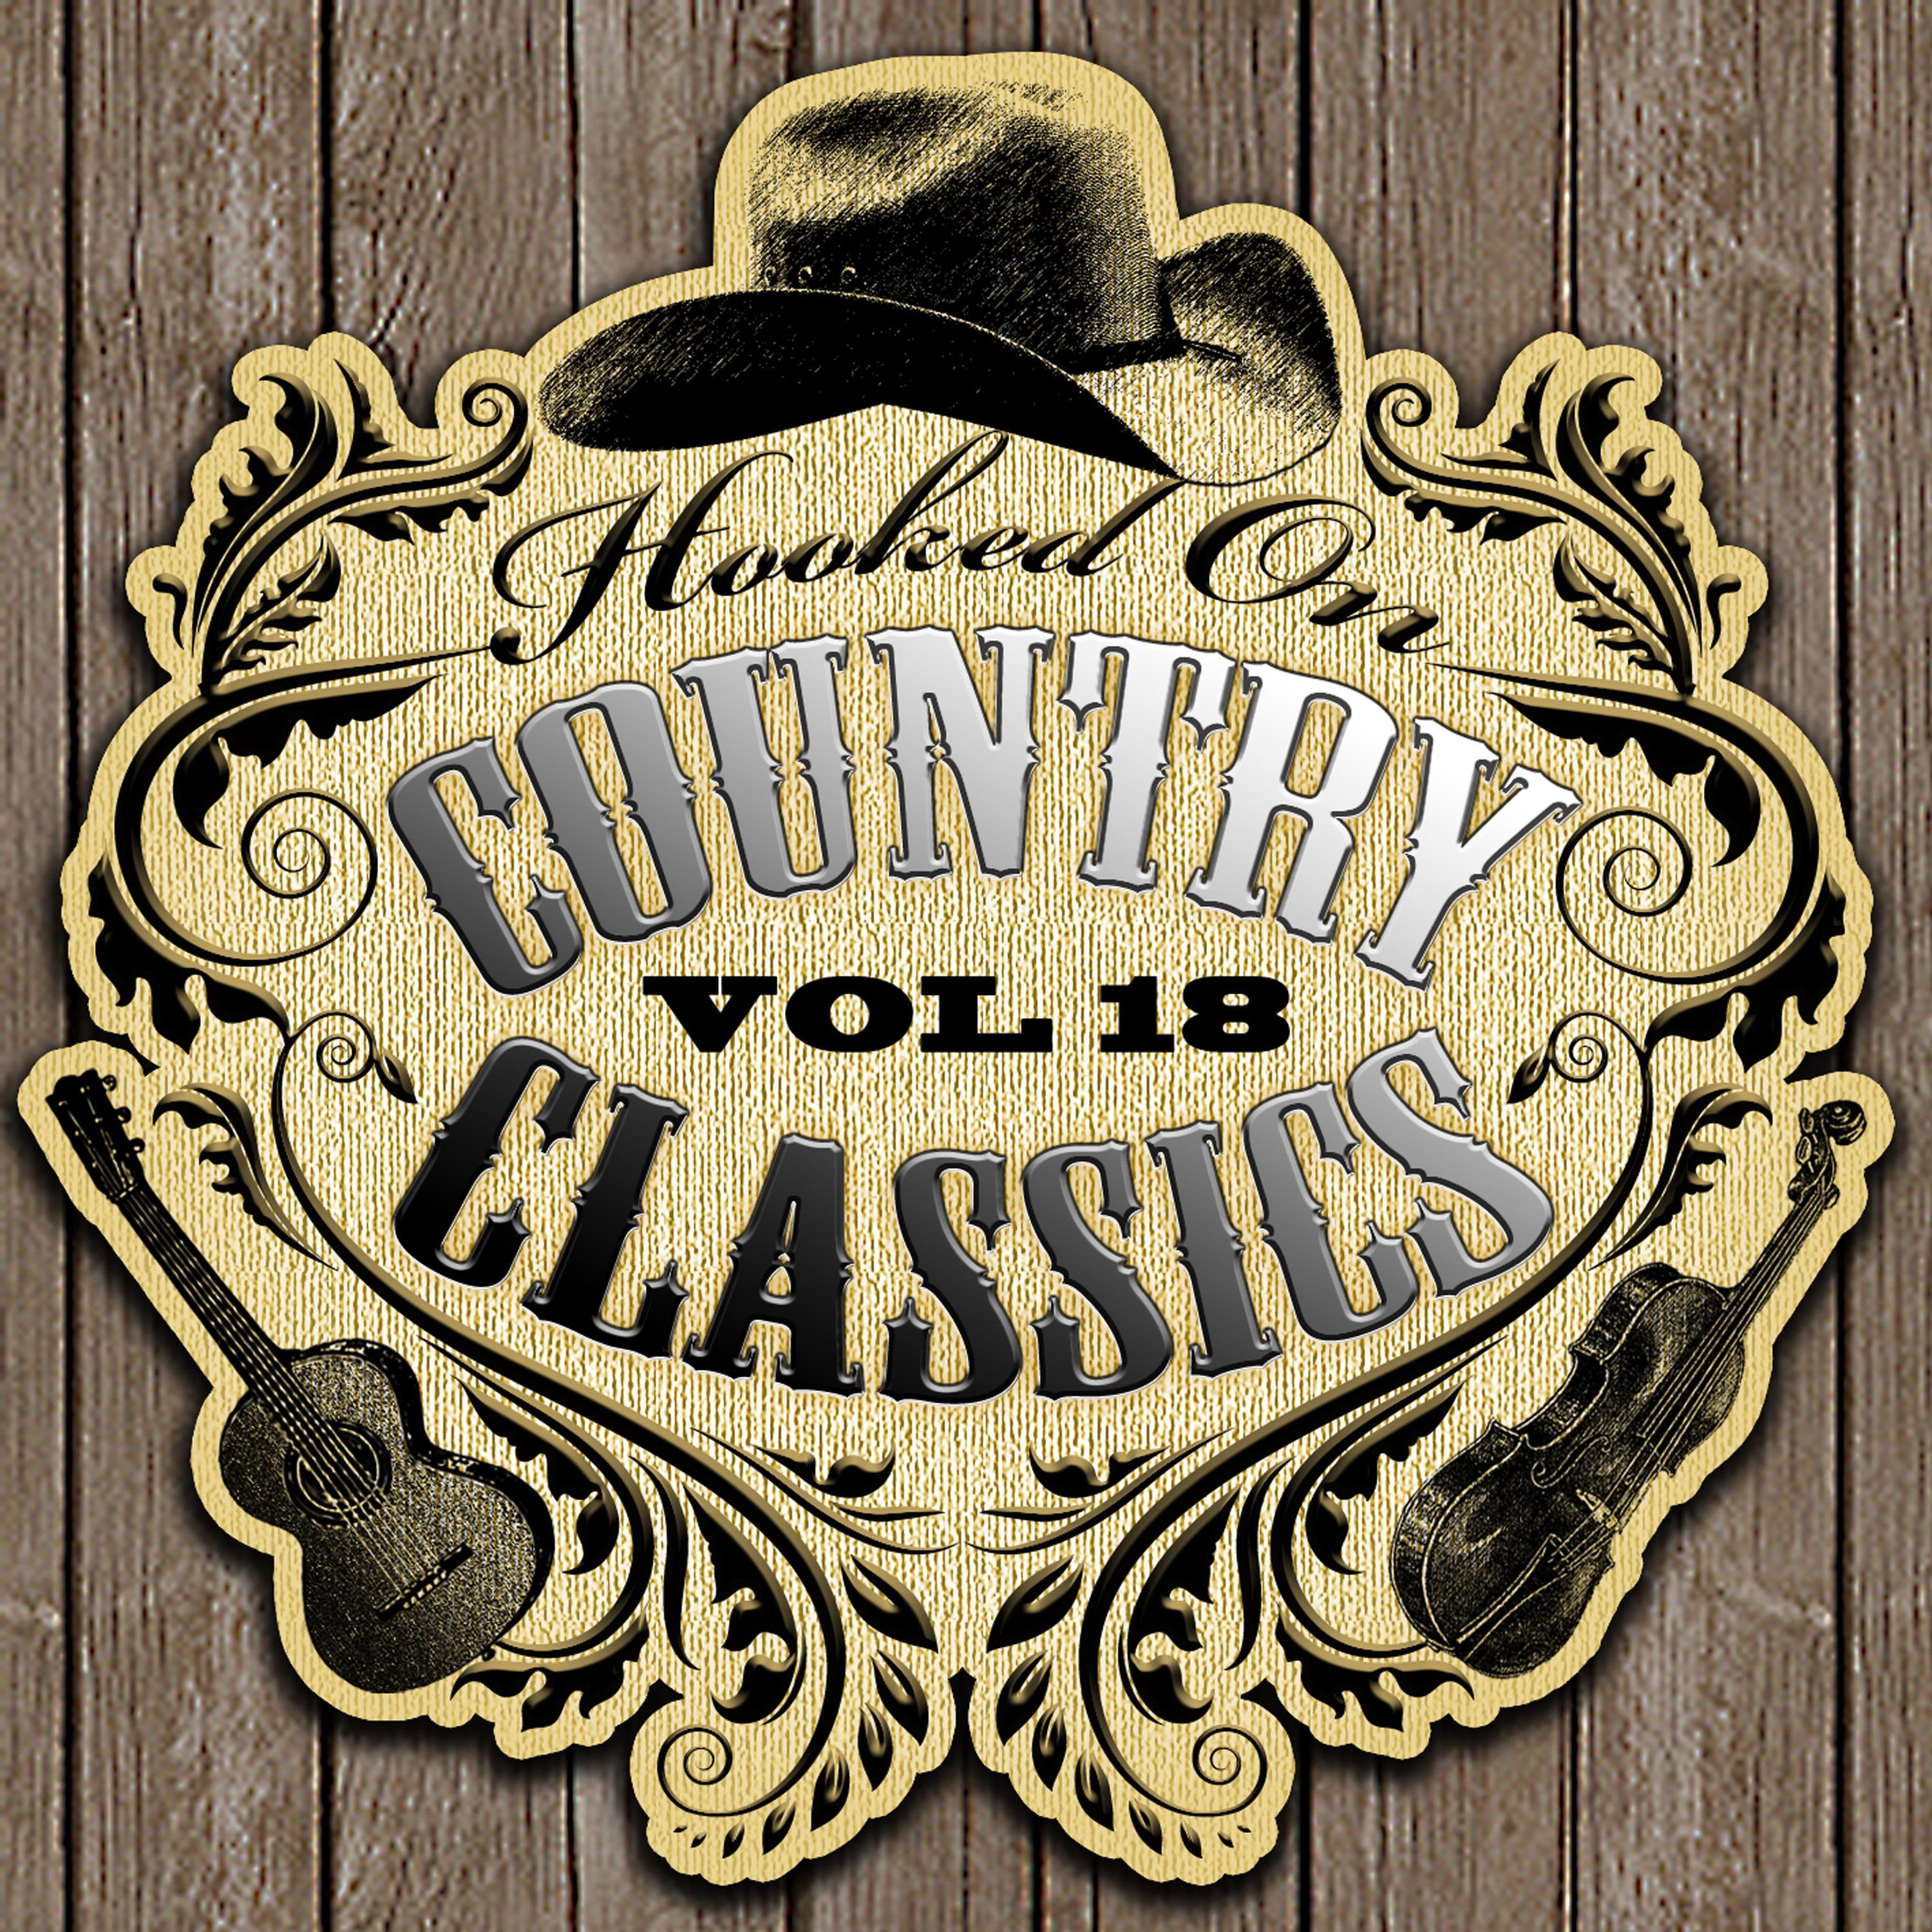 Hooked On Country Classics, Vol. 18